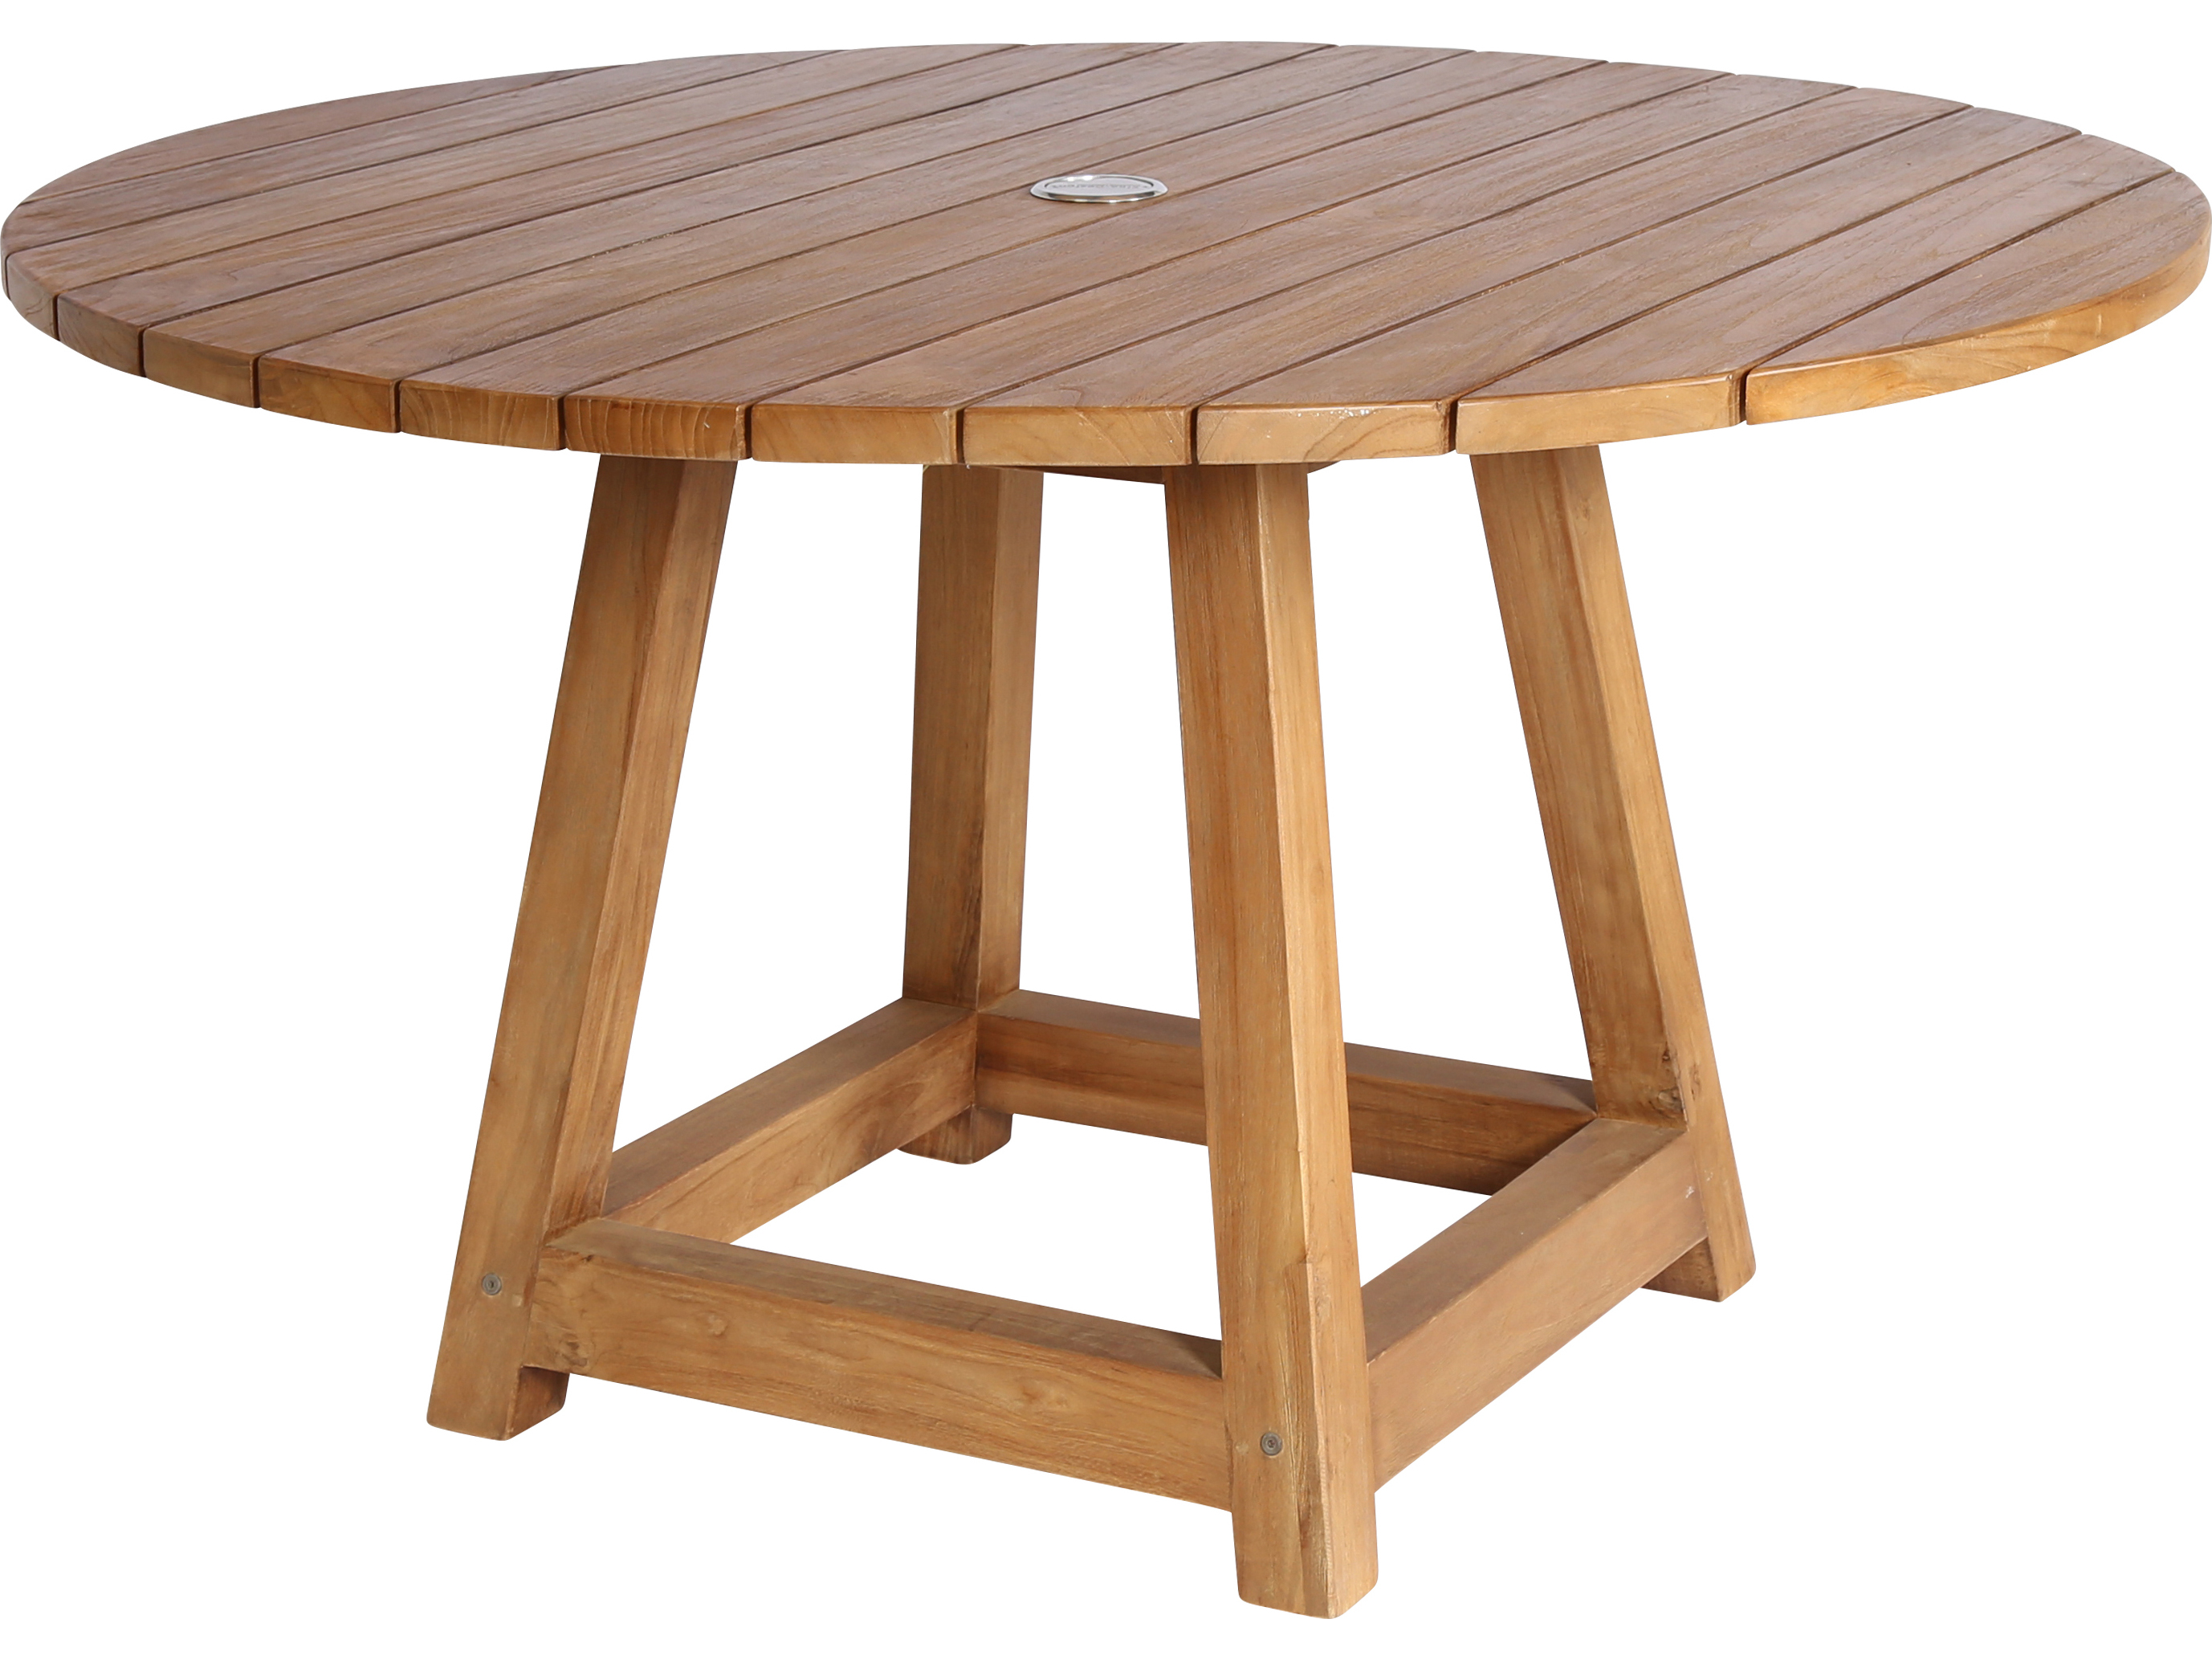 Sika Design Teak Natural Brown George, Round Outdoor Dining Table 23 58 In W X L With Umbrella Hole